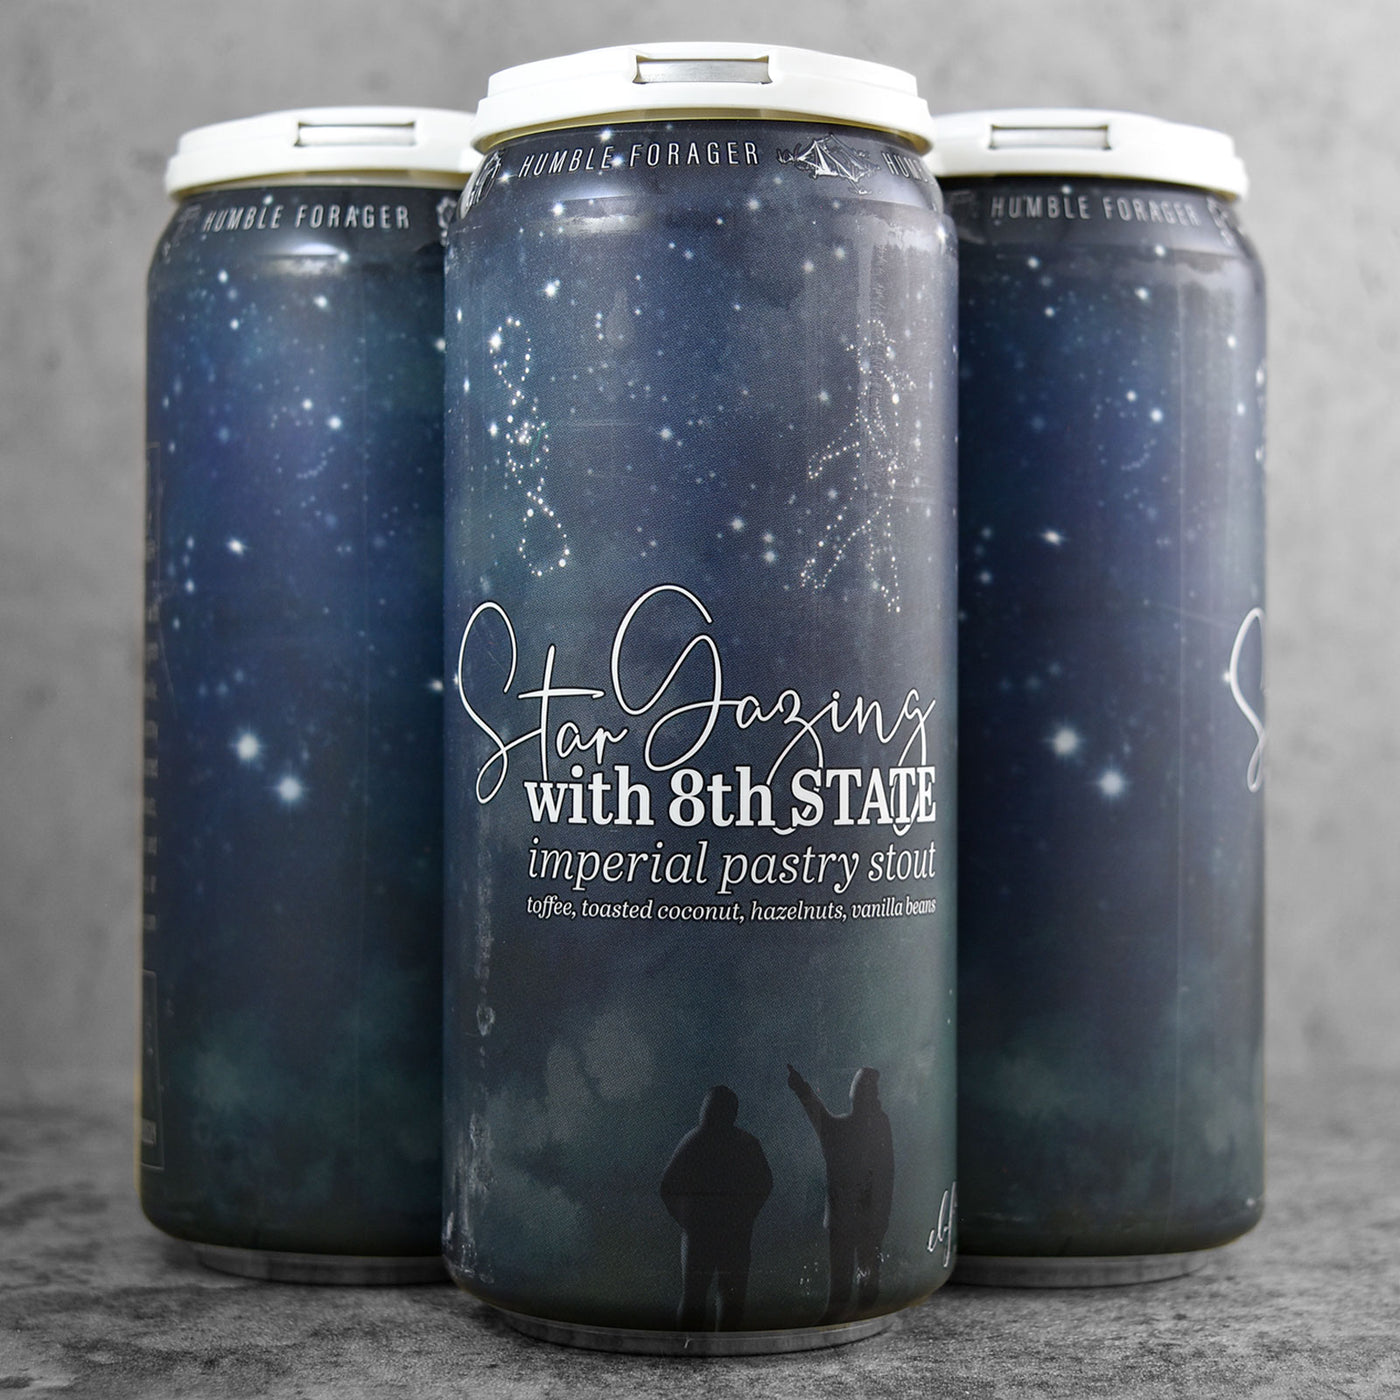 Humble Forager x 8th State - Star Gazing